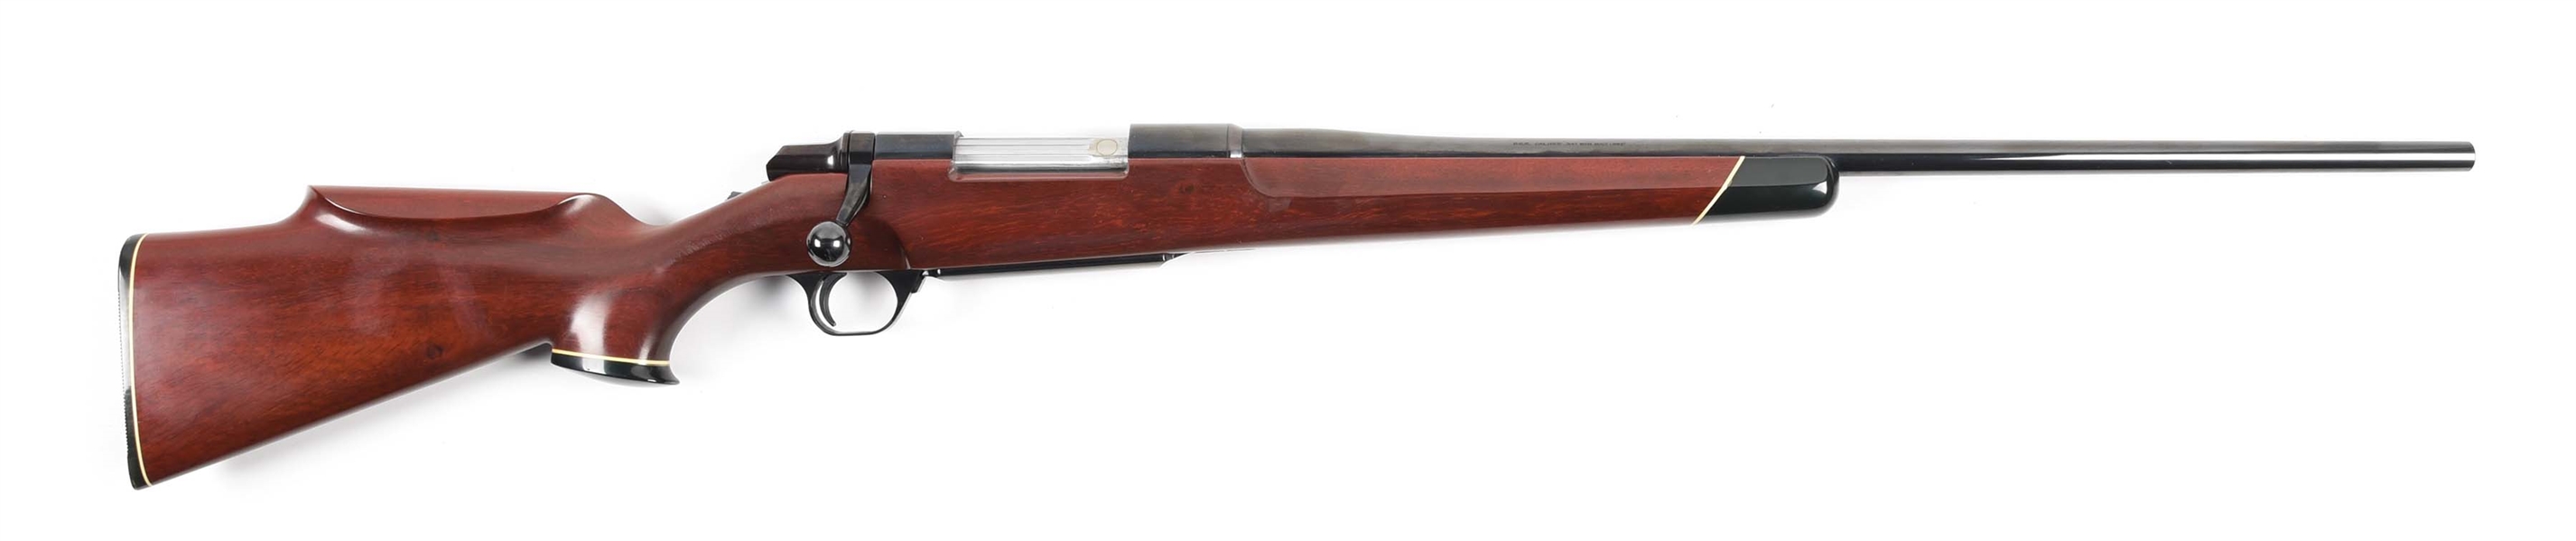 (M) BROWNING BBR BOLT ACTION RIFLE WITH KUSIA STOCK.